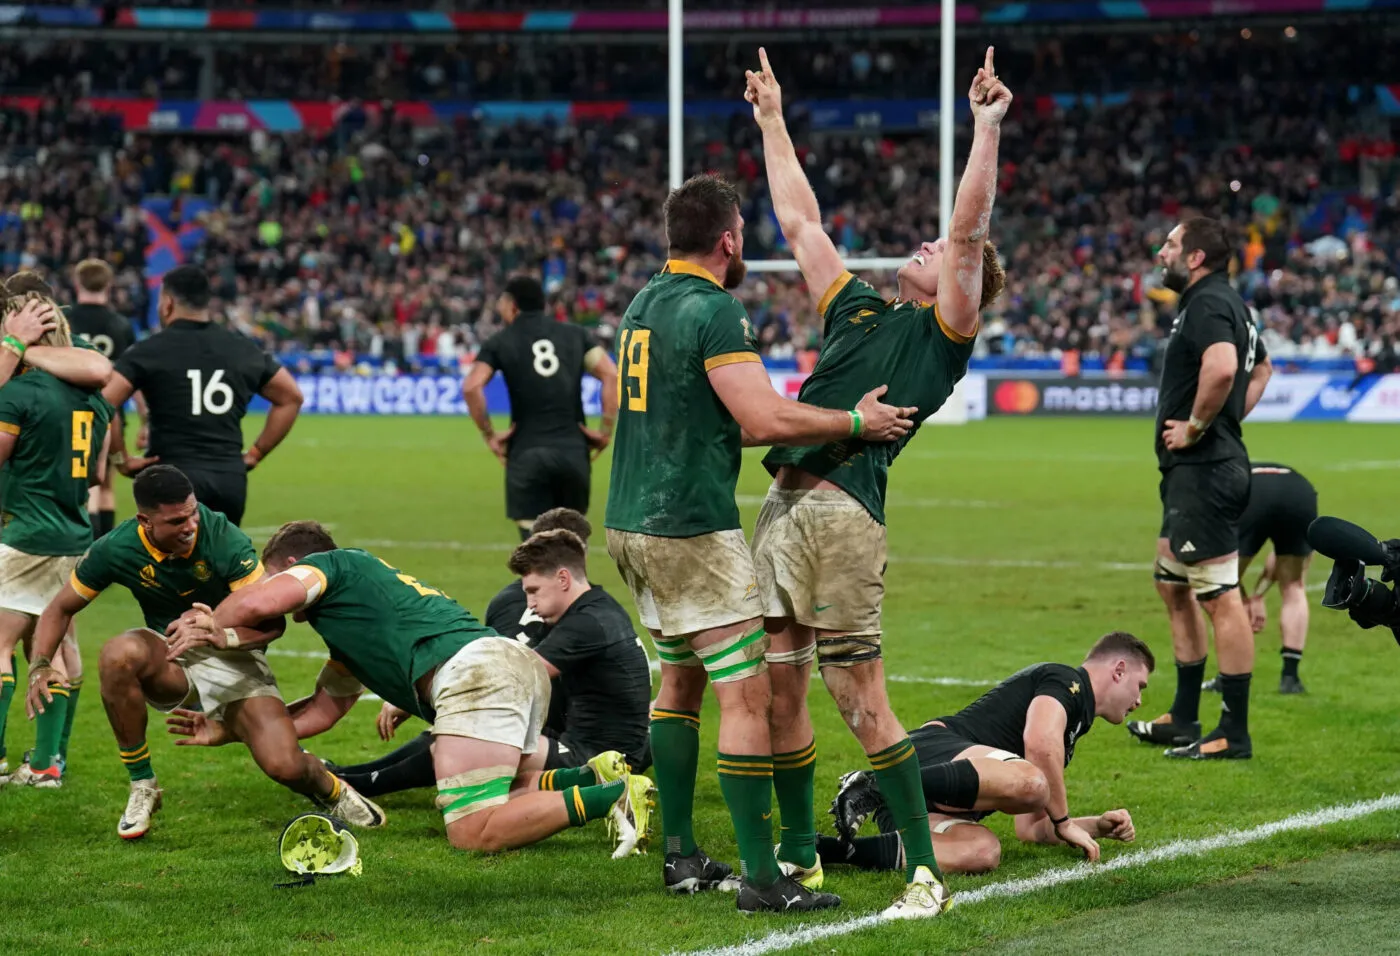 South Africa's Jean Kleyn (left) and Pieter-Steph Du Toit celebrate victory after the final whistle following the Rugby World Cup 2023 final match at the Stade de France in Paris, France. Picture date: Saturday October 28, 2023. - Photo by Icon sport